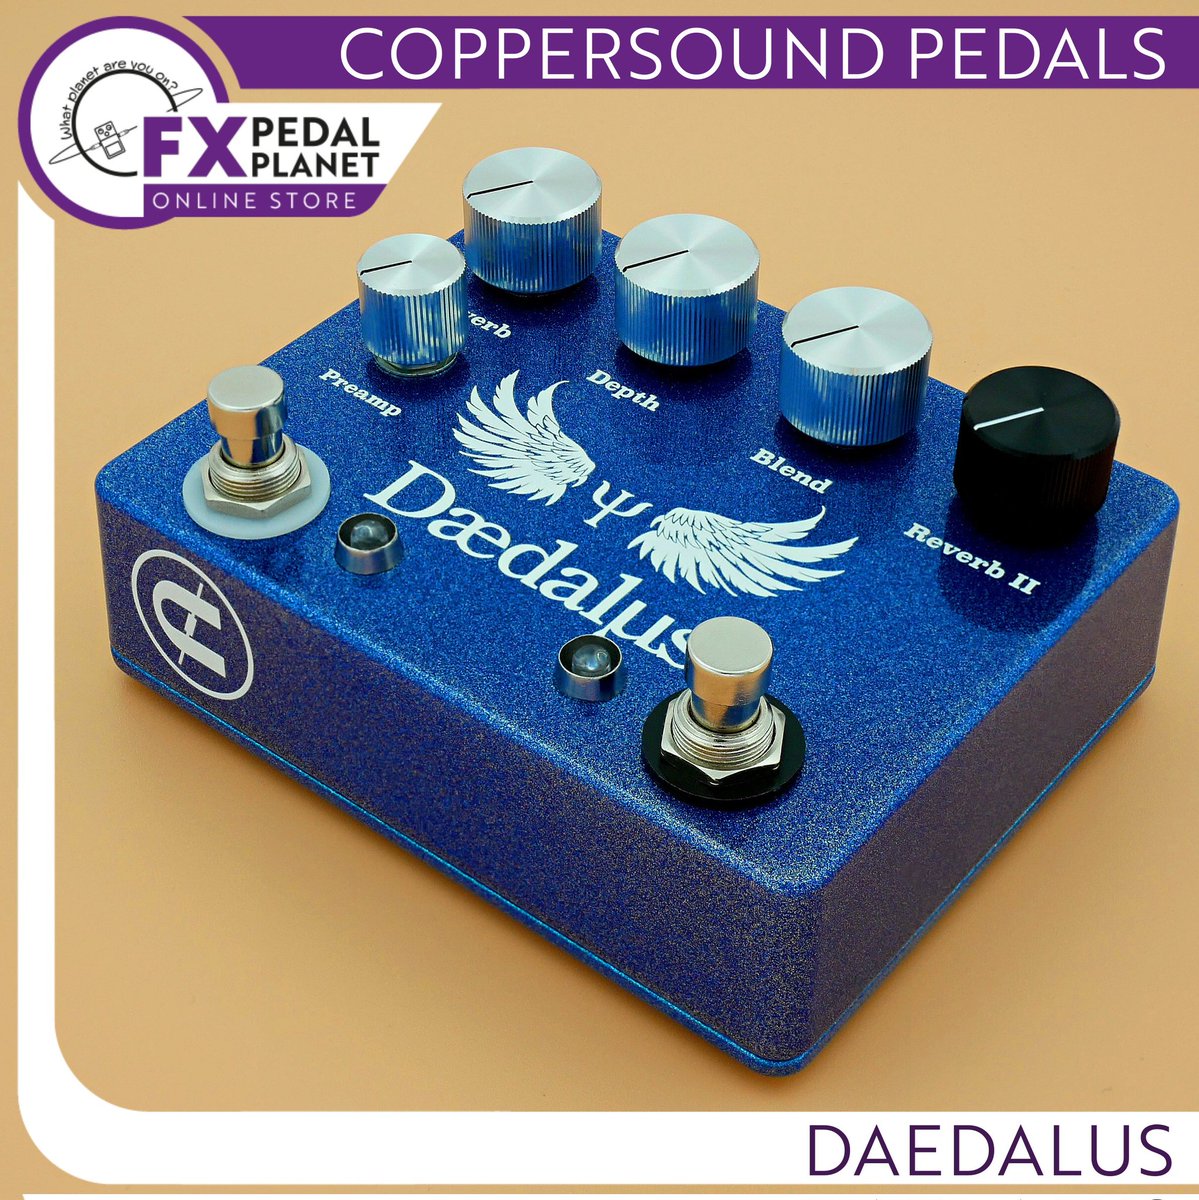 @CopperSoundFX Daedalus

fxpedalplanet.co.uk/product/copper…

#fxpedalplanetonlinestore 
#coppersoundpedals #coppersoundpedalsdaedalus #reverbpedal #platereverb 

#handmadepedals #boutiqueeffectspedals #effectspedals #guitareffects #basseffects #guitareffectspedals #basseffectspedals